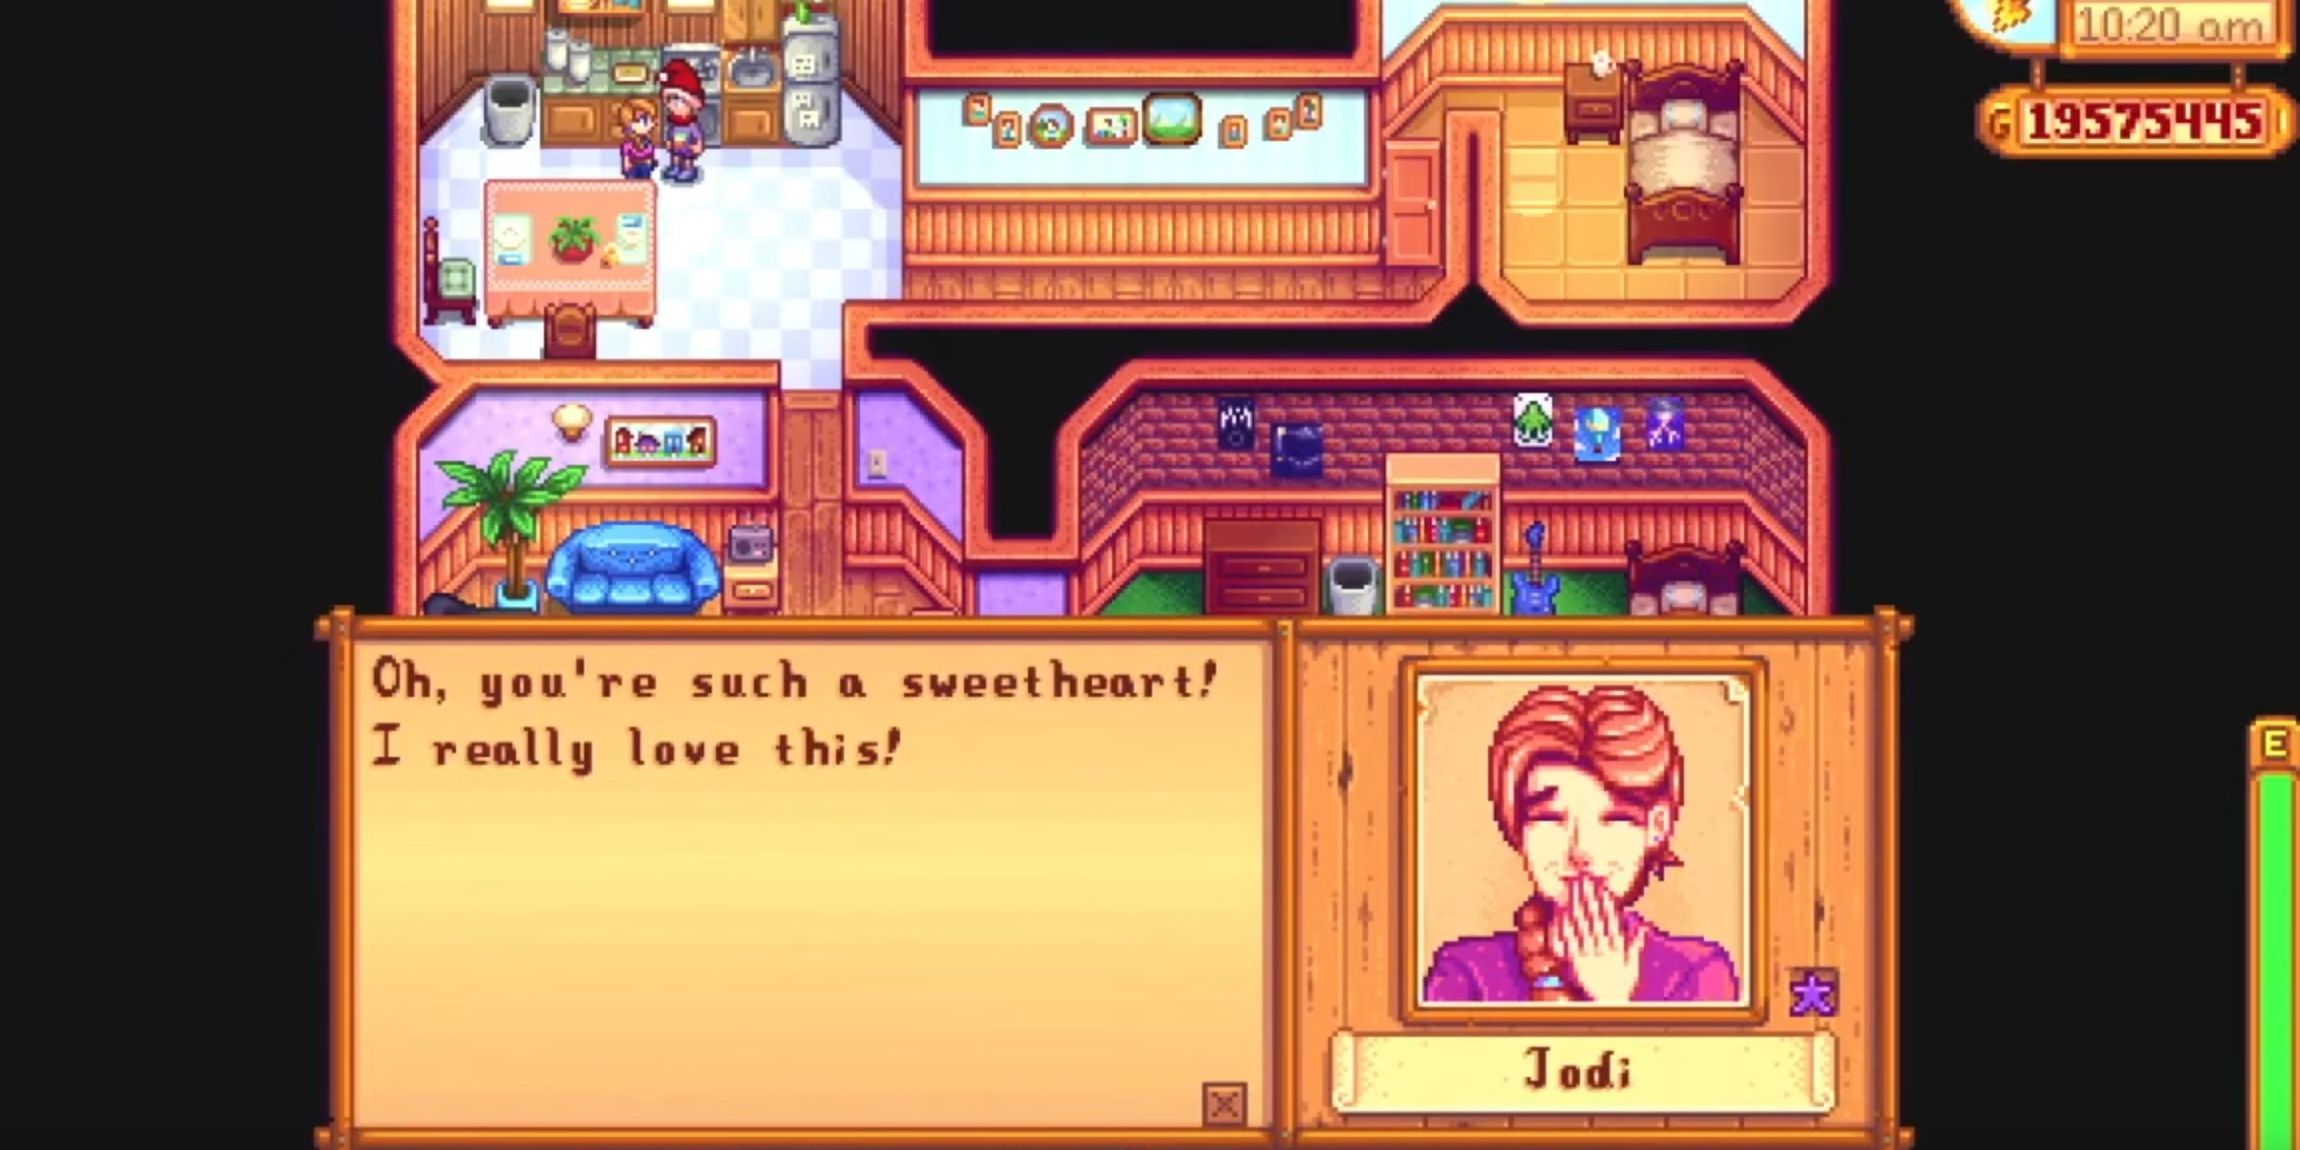 Jodi recieves a liked gift in her home